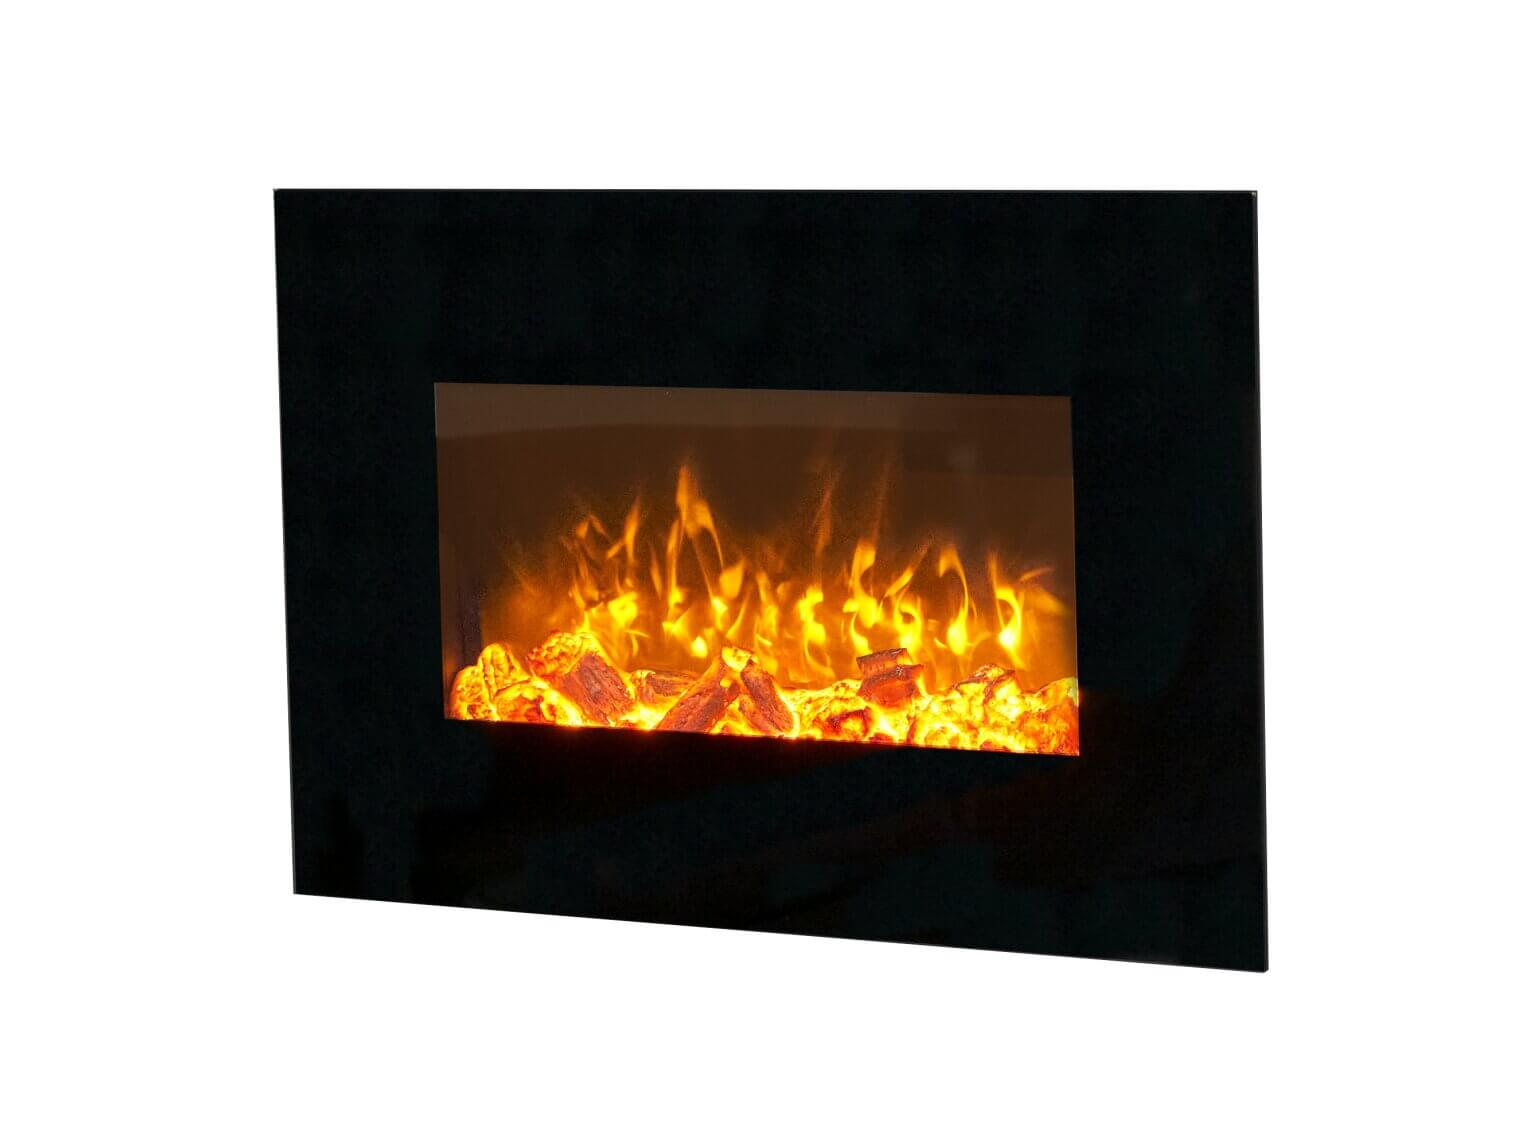 Sureflame WM-9334 Electric Wall Mounted Fire with Remote in Black, 26 Inch - Glowing Flames